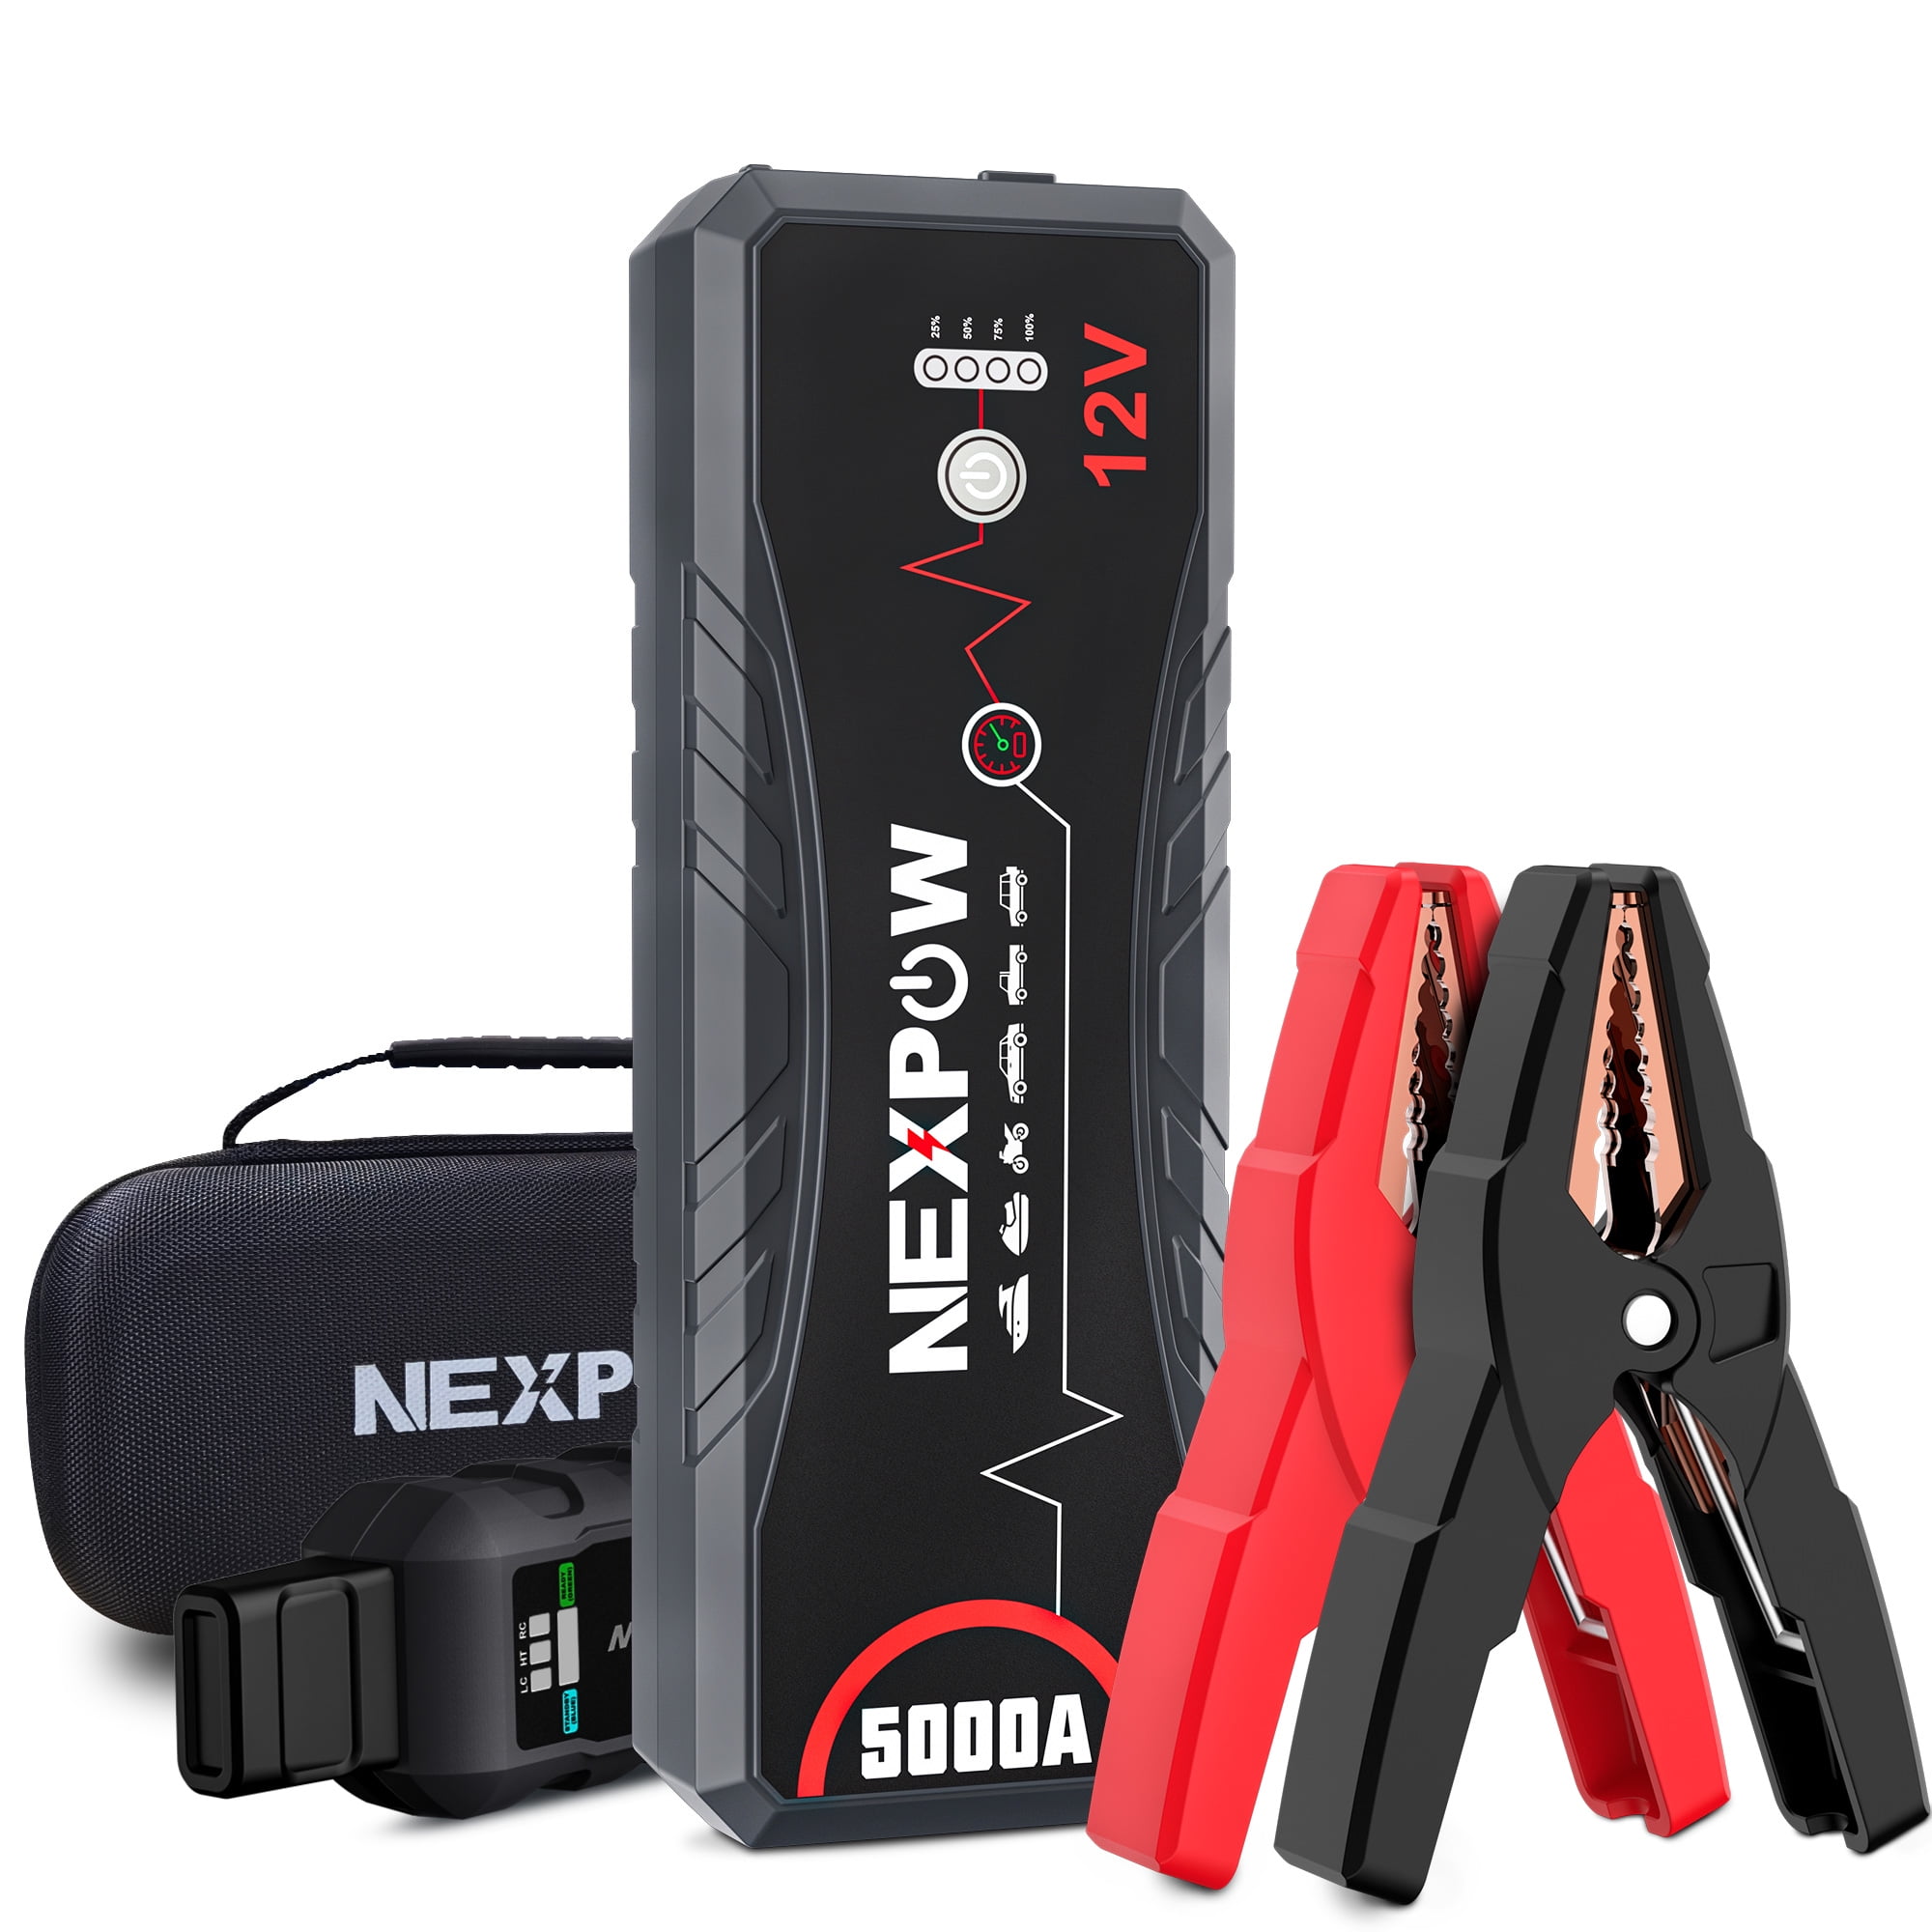 43% Discount on NEXPOW 2500A Portable Jump Starter Today - Global Village  Space